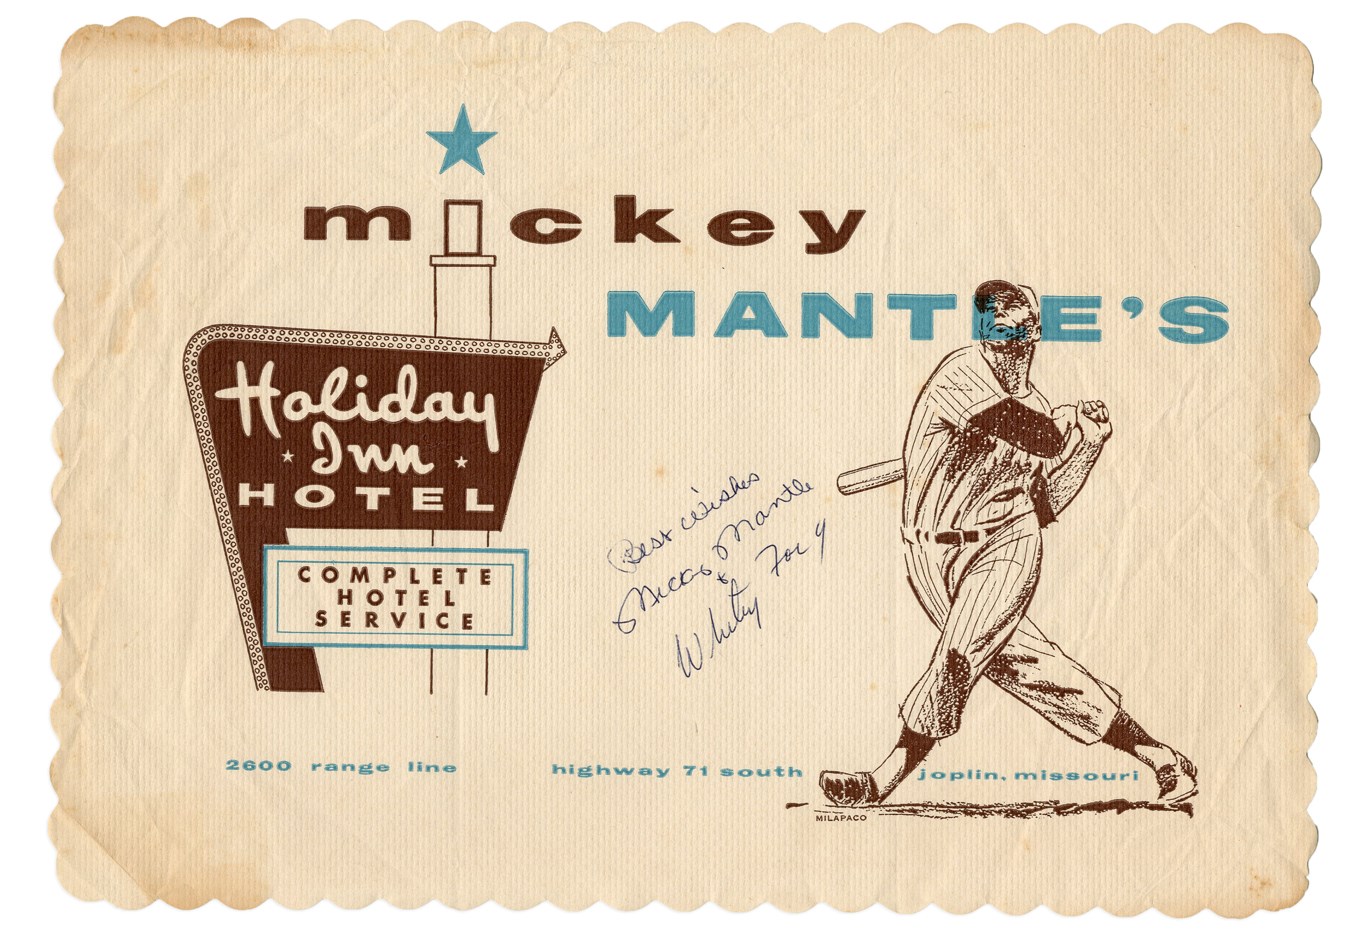 Baseball Autographs - 1960s Mickey Mantle & Whitey Ford Signed Joplin Holiday Inn Restaurant Placemat (PSA/DNA)